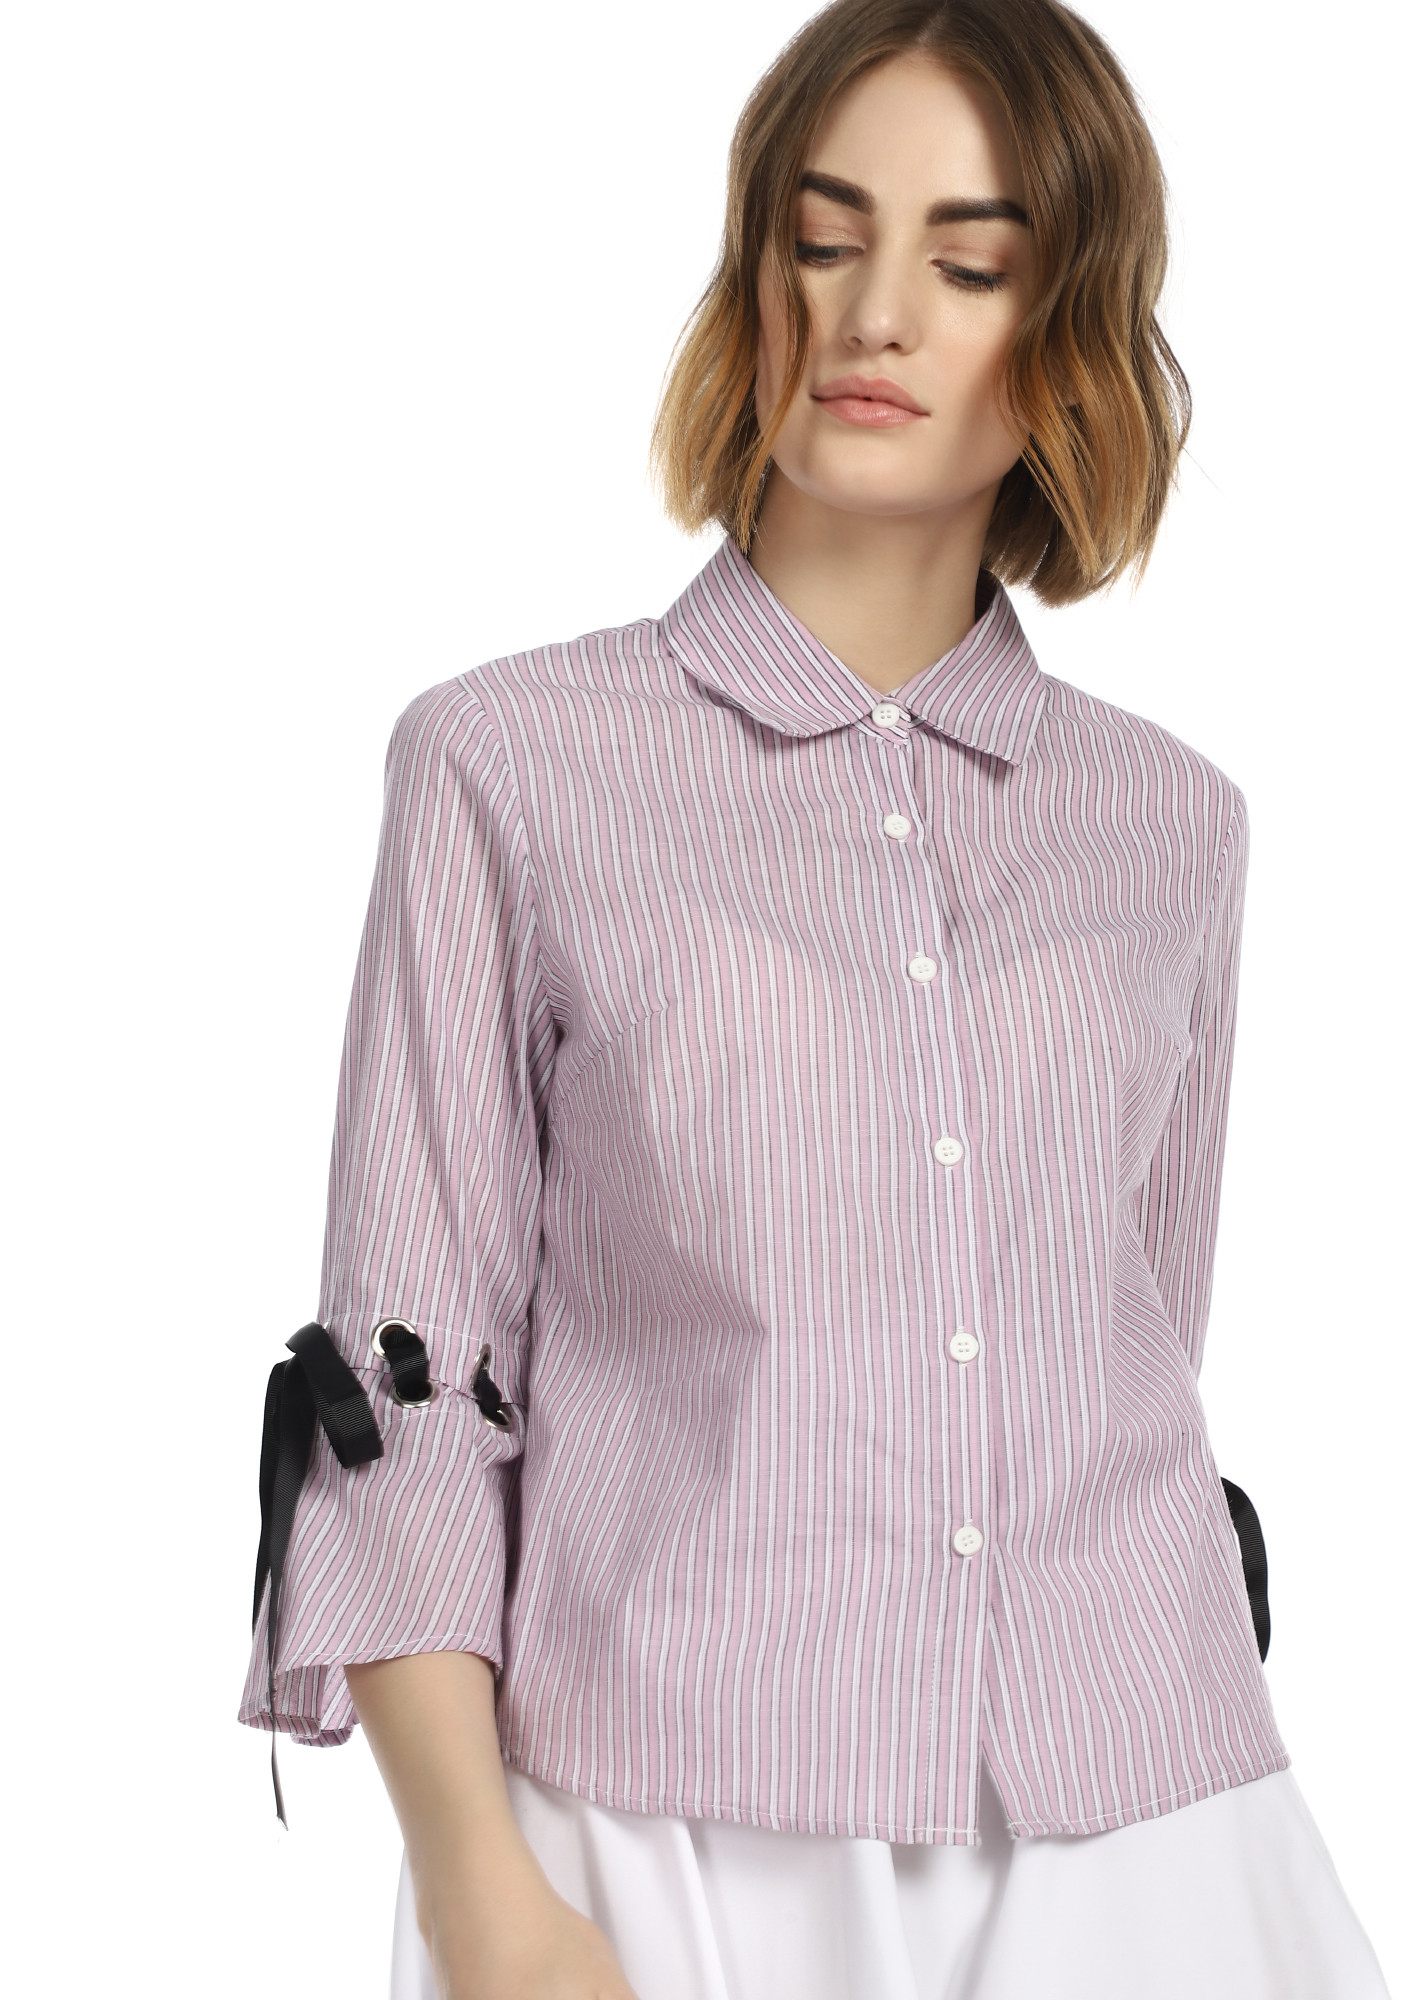 TAKE YOUR LACES SERIOUSLY MAUVE SHIRT